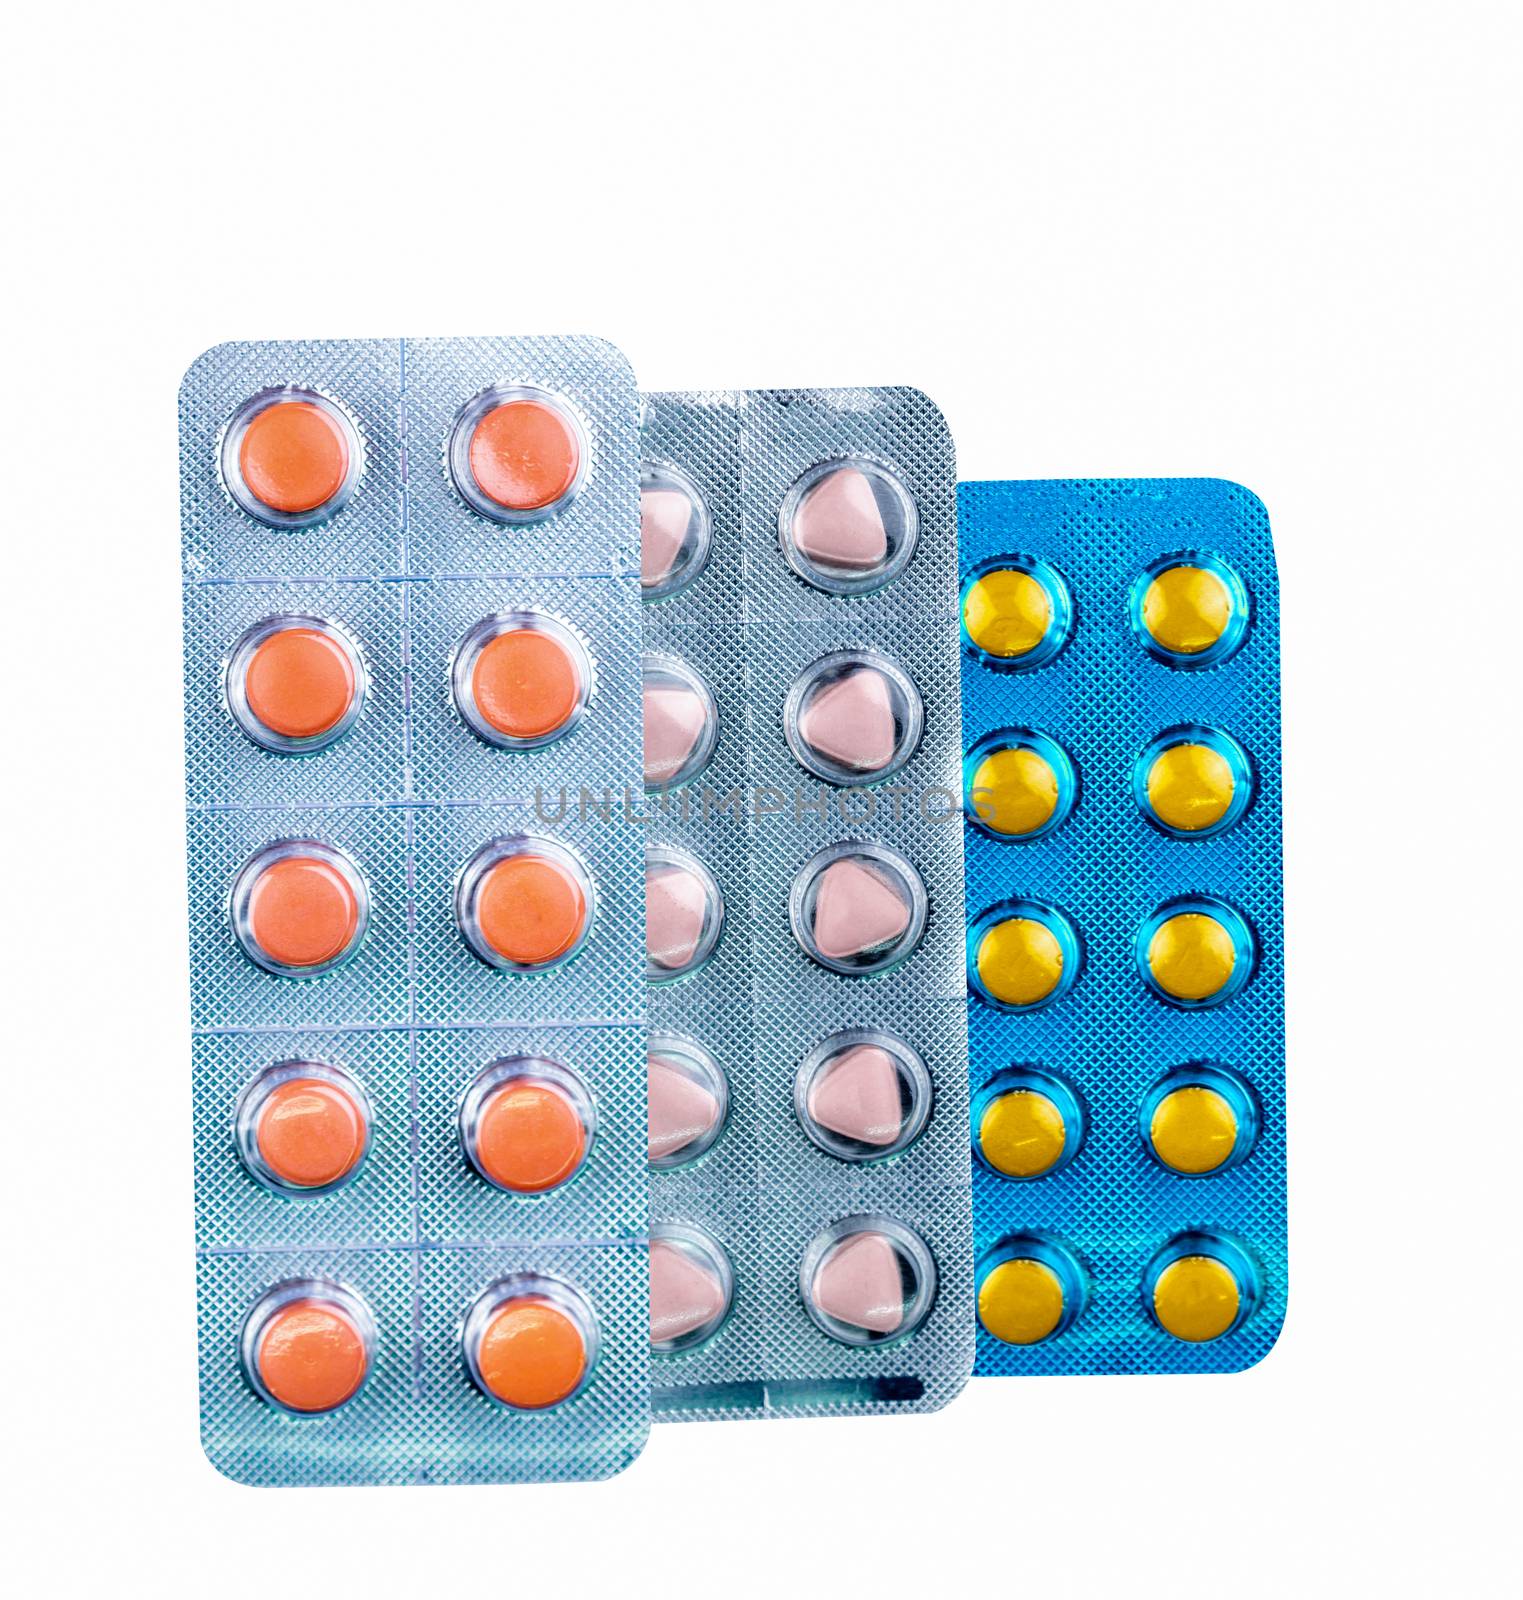 Diclofenac in blister pack isolated on white background. Drug with round and triangle shaped in pack. Film coated tablets. Orange, yellow, and pale pink tablets pills. Painkiller medicine. Pharmacy. by Fahroni